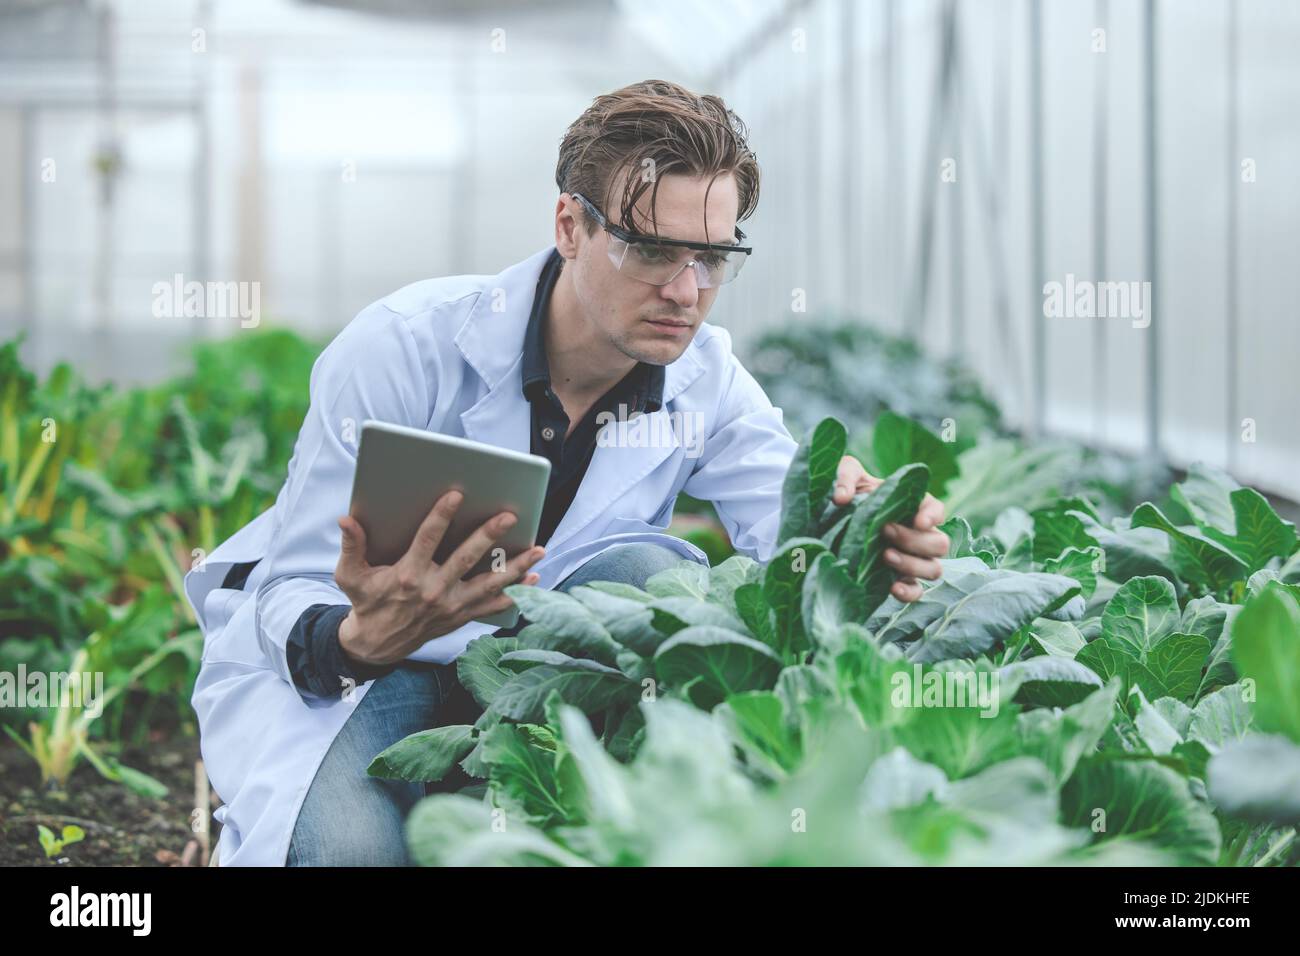 Agriculture plant science technology research and development concept. Stock Photo